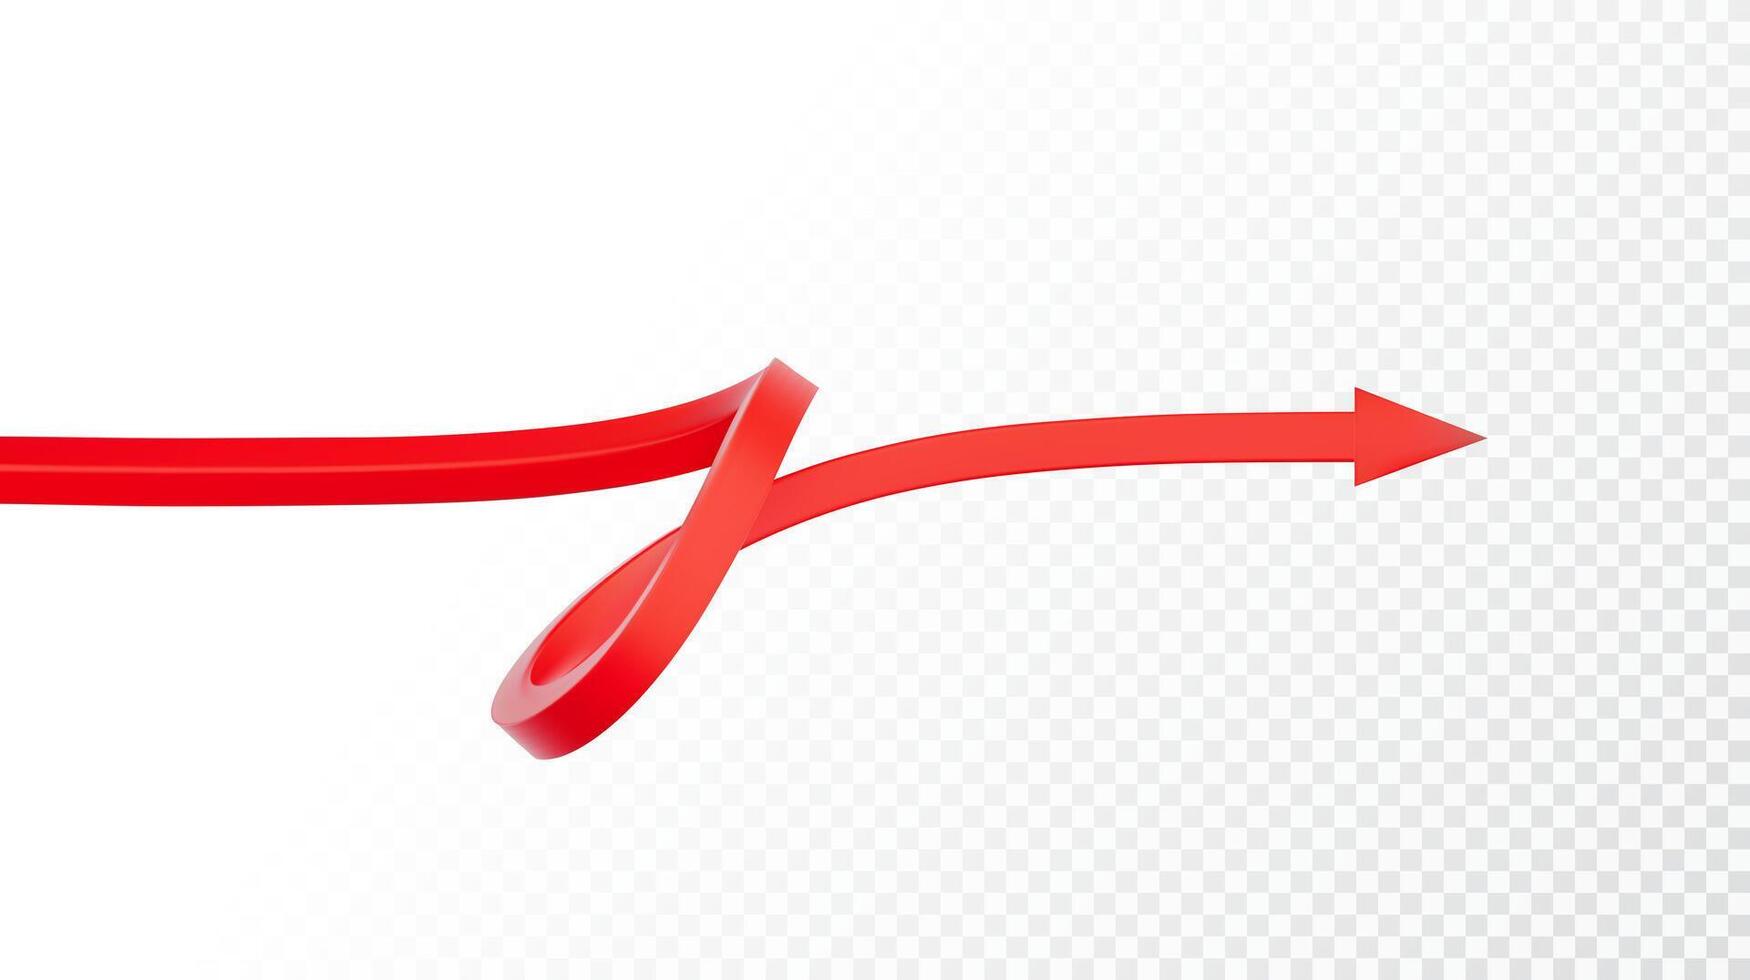 Realistic 3d Detailed Red Arrow. Vector illustration for your graphic design. Eps 10